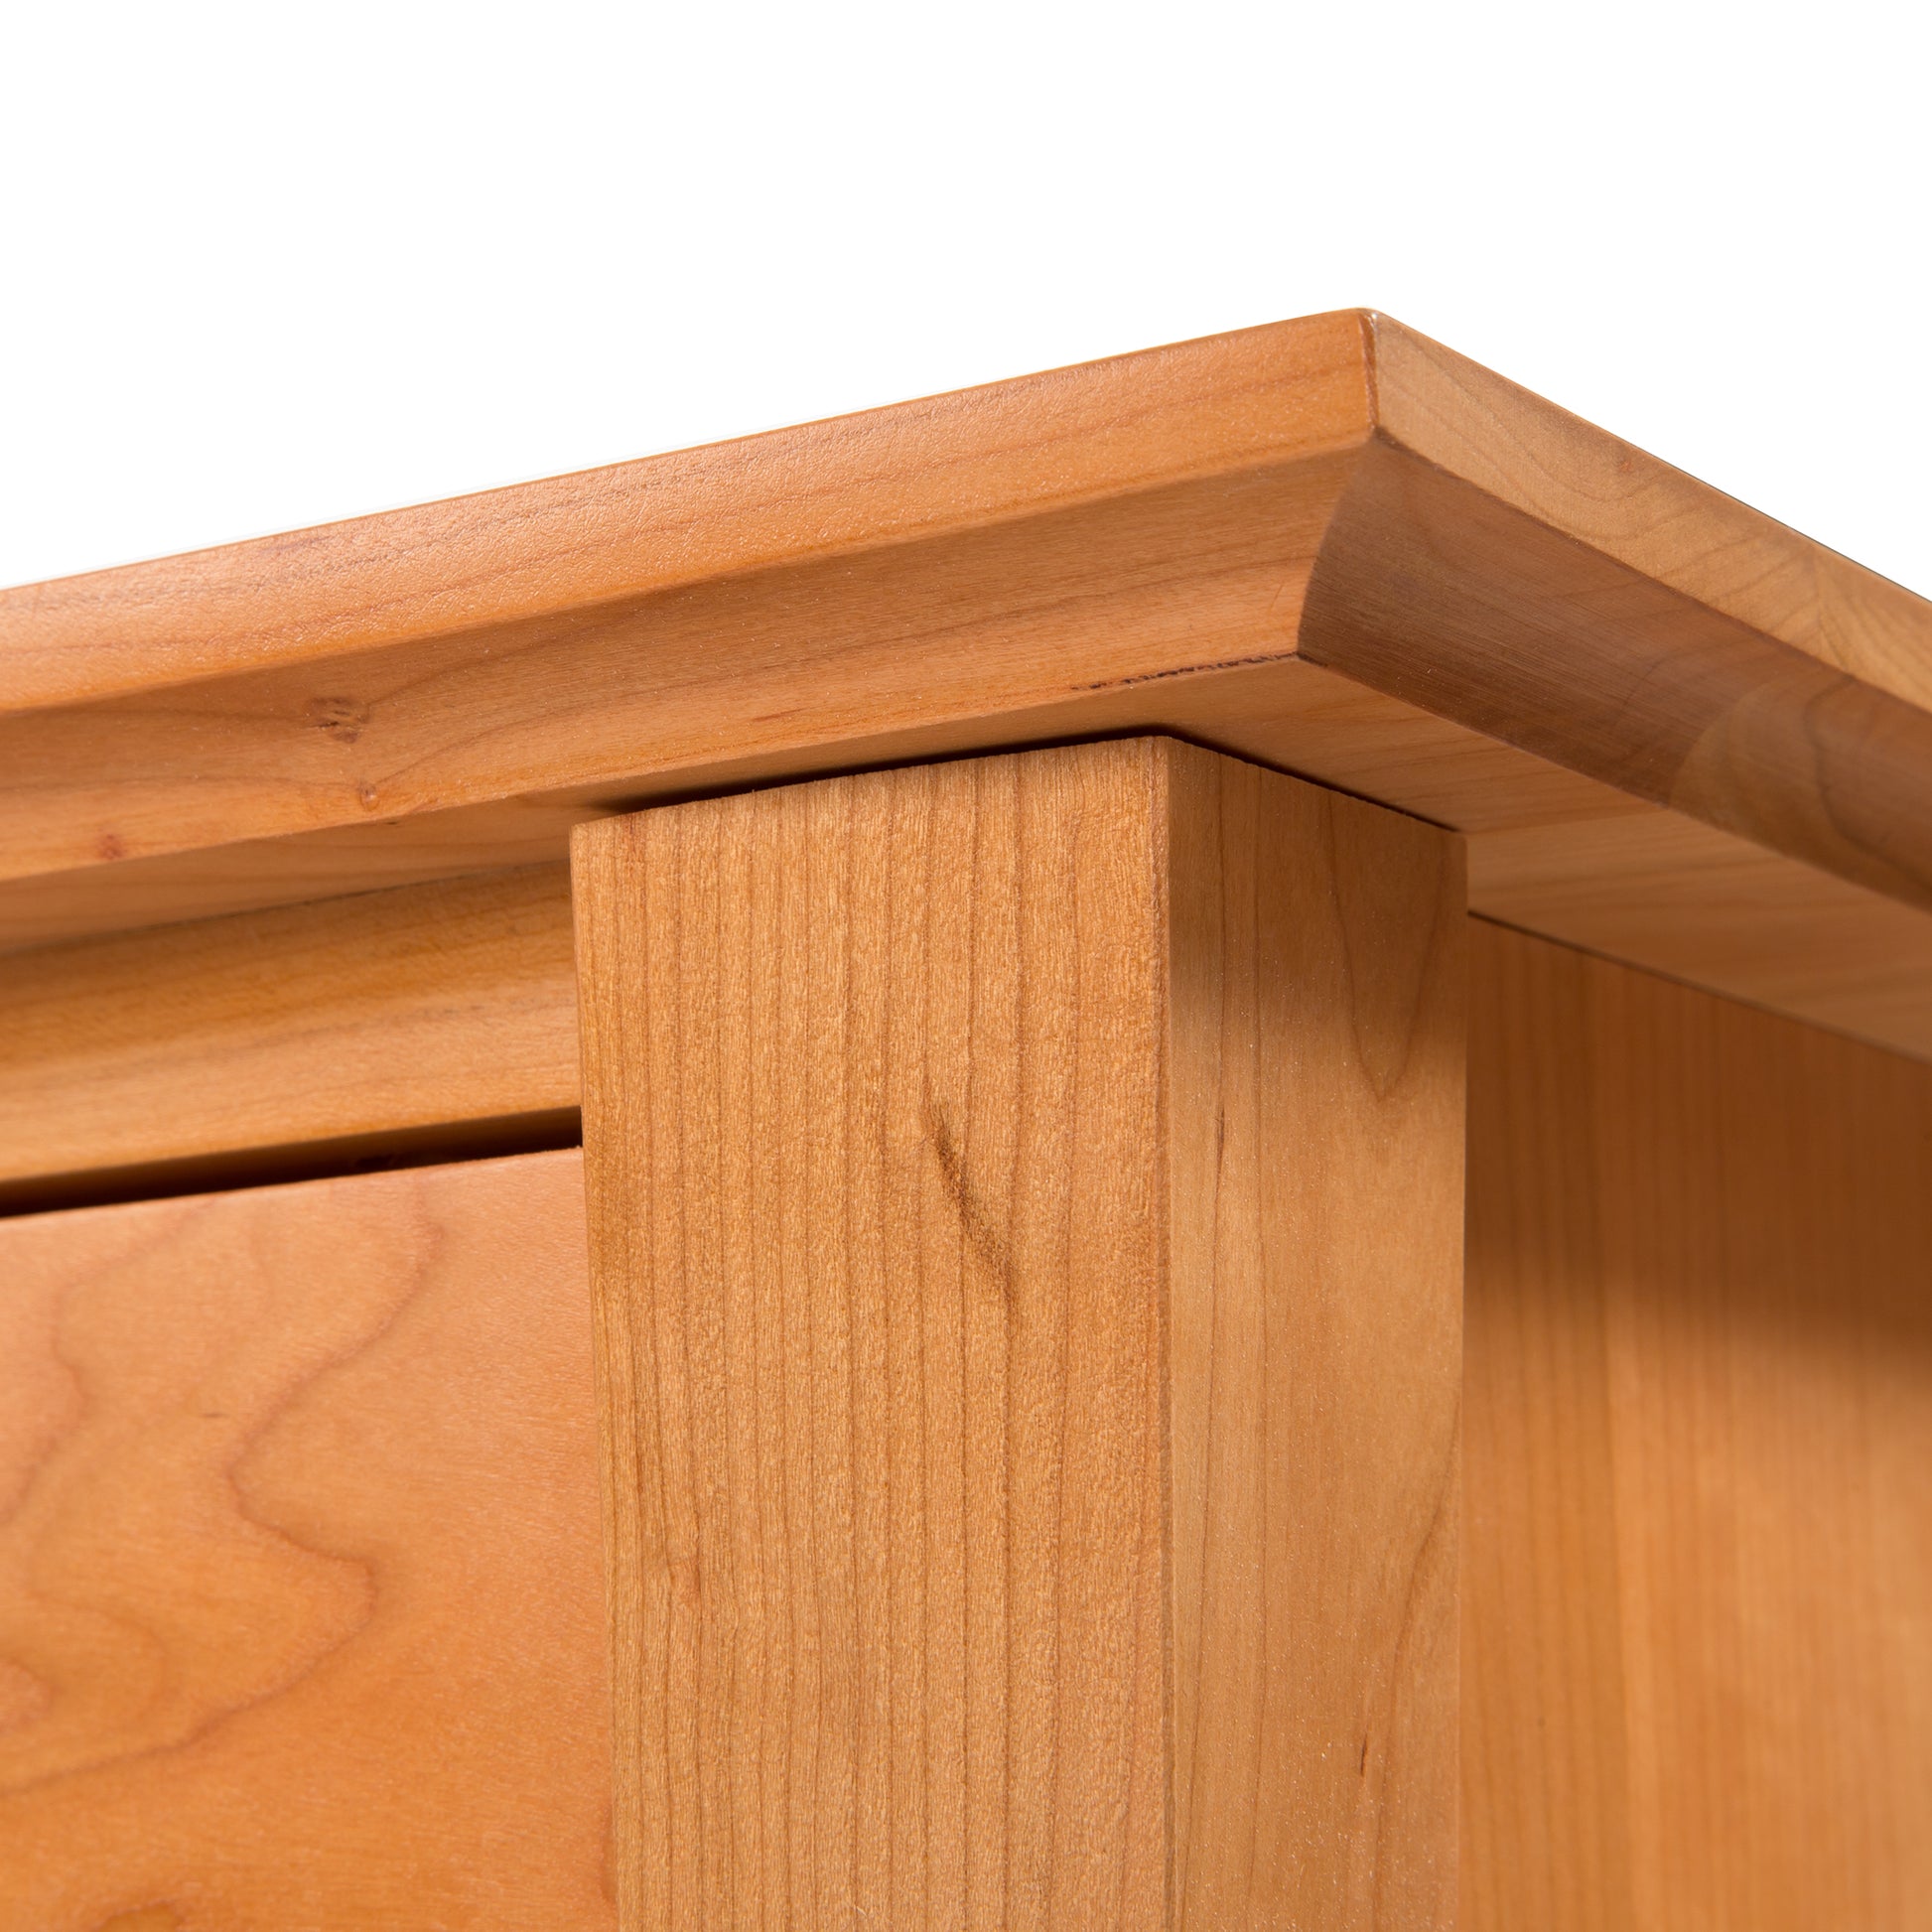 A close up of the top of a wooden Lyndon Furniture Green Mountain 3-Drawer Nightstand.